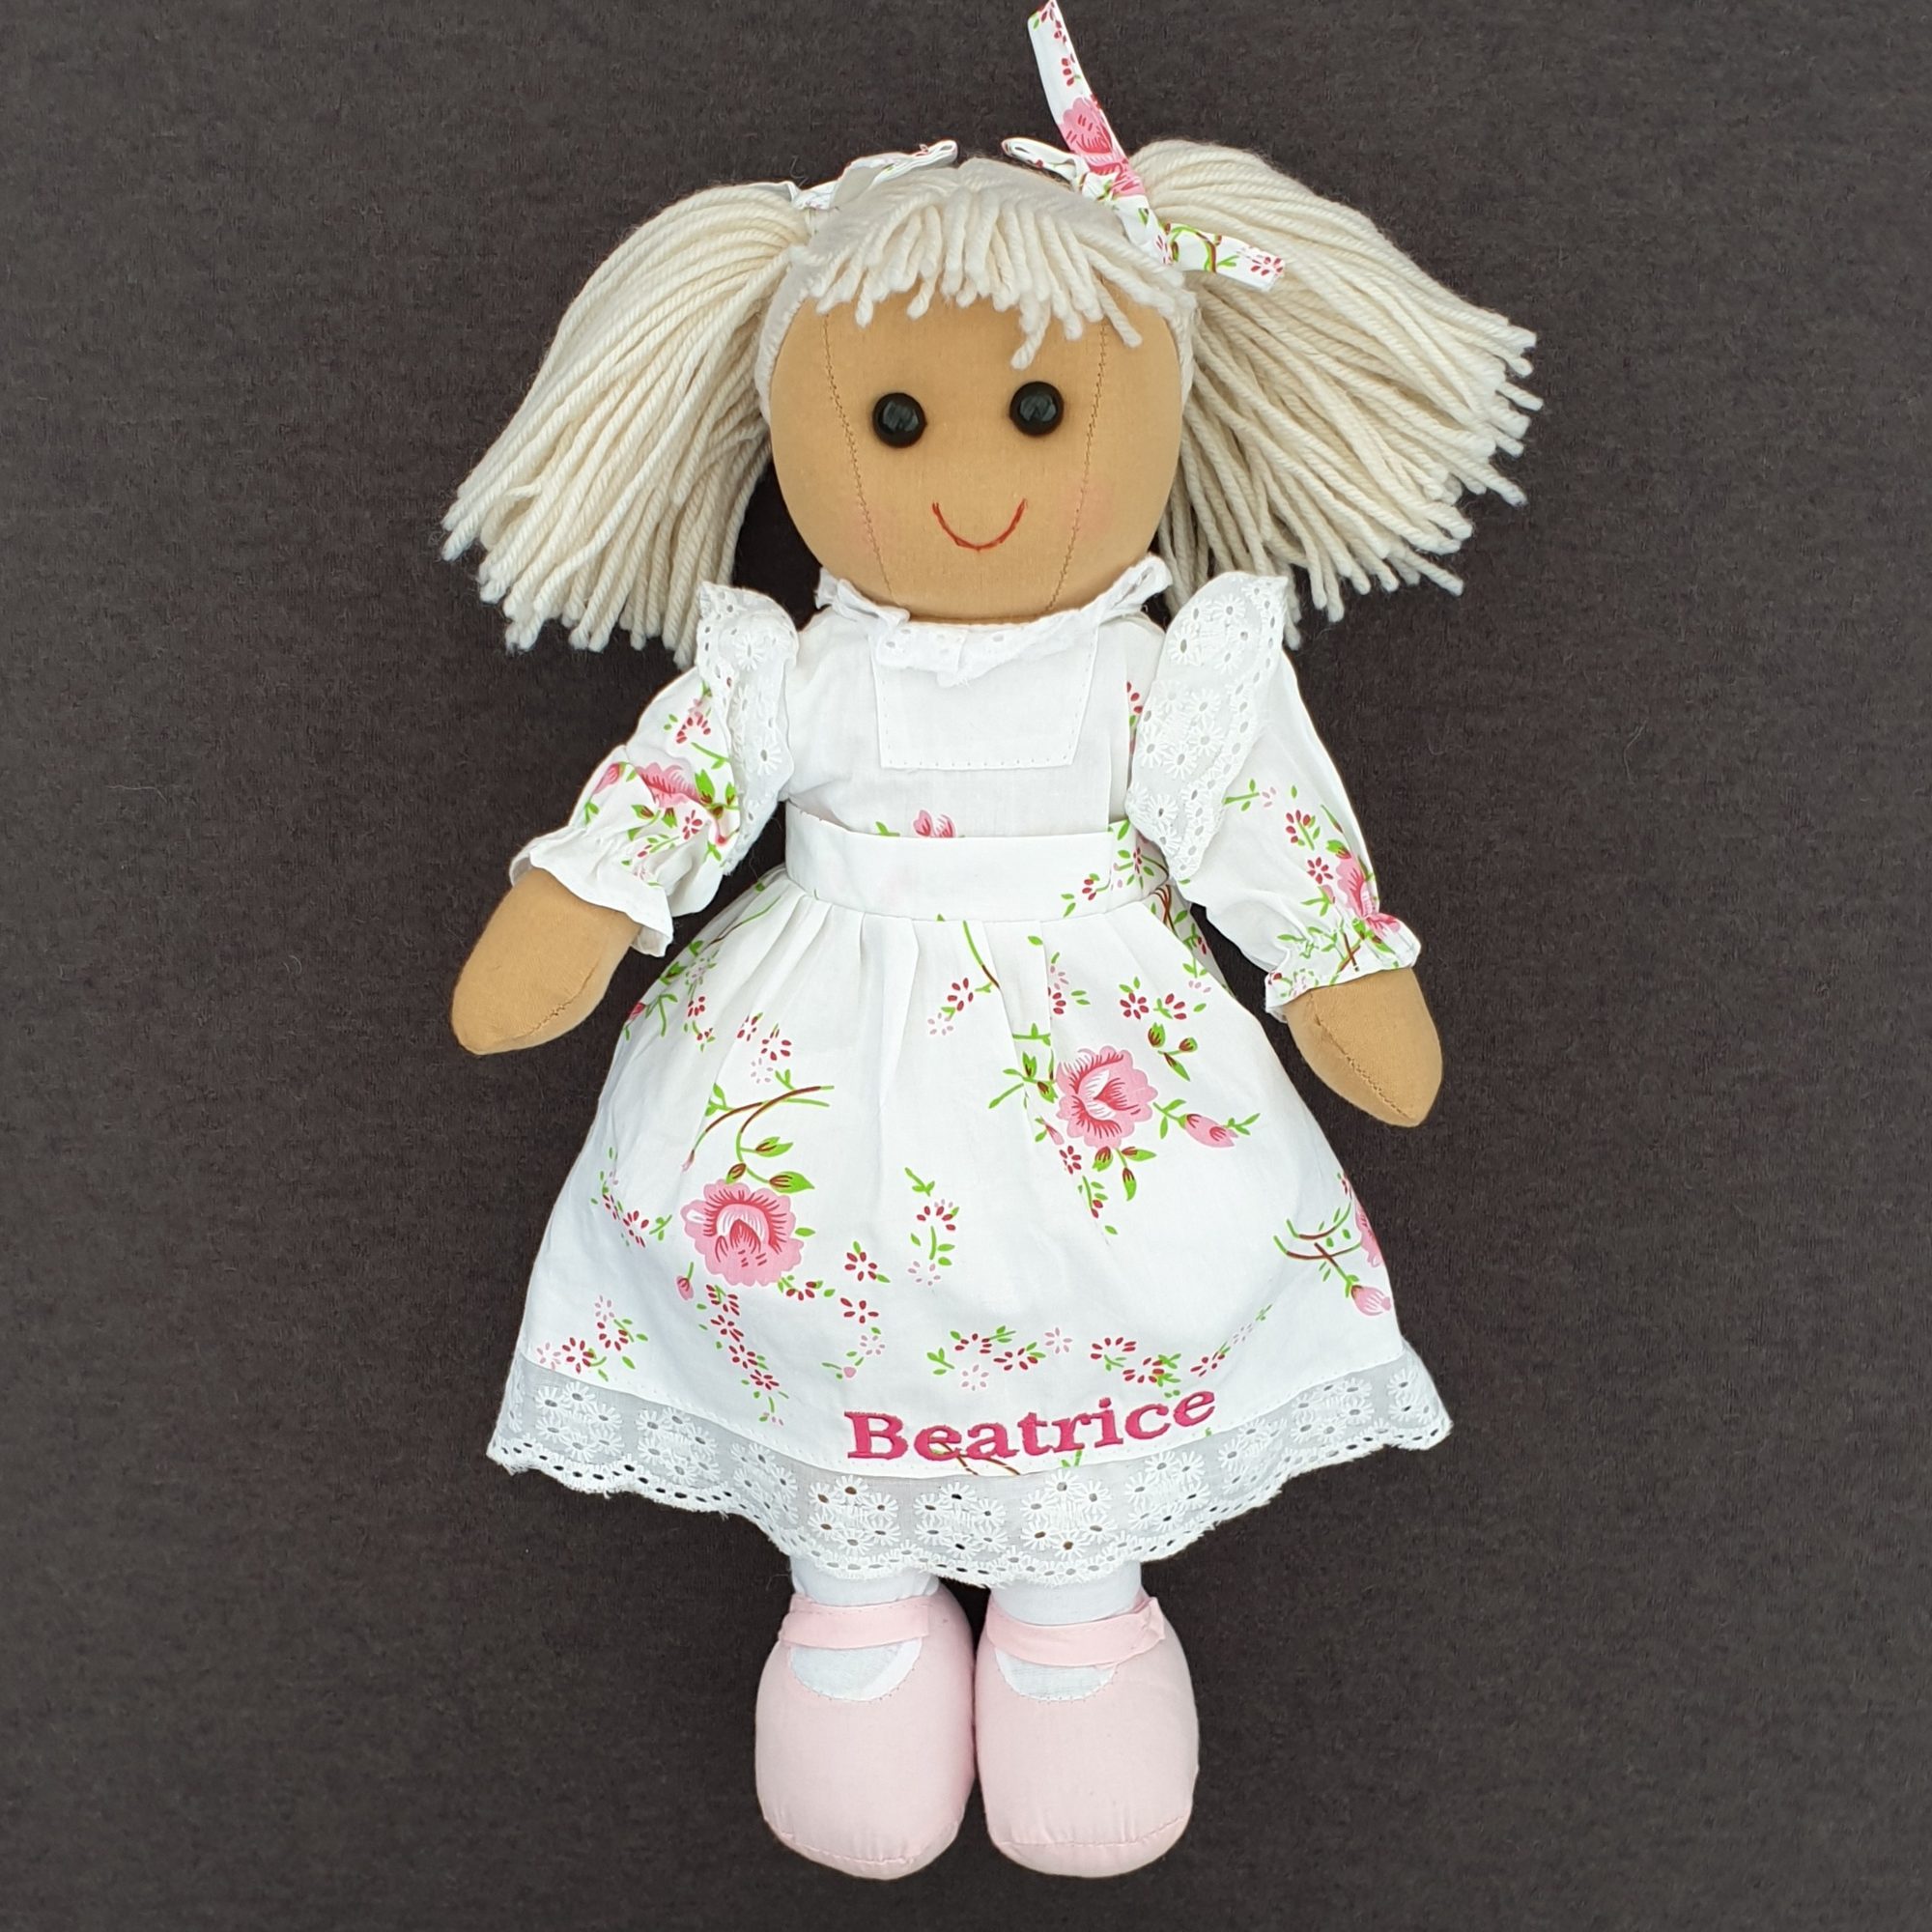 Personalised rag doll with blonde hair and a beautiful white dress with pink flowers on it. The dress can be personalised with a name of your choice.